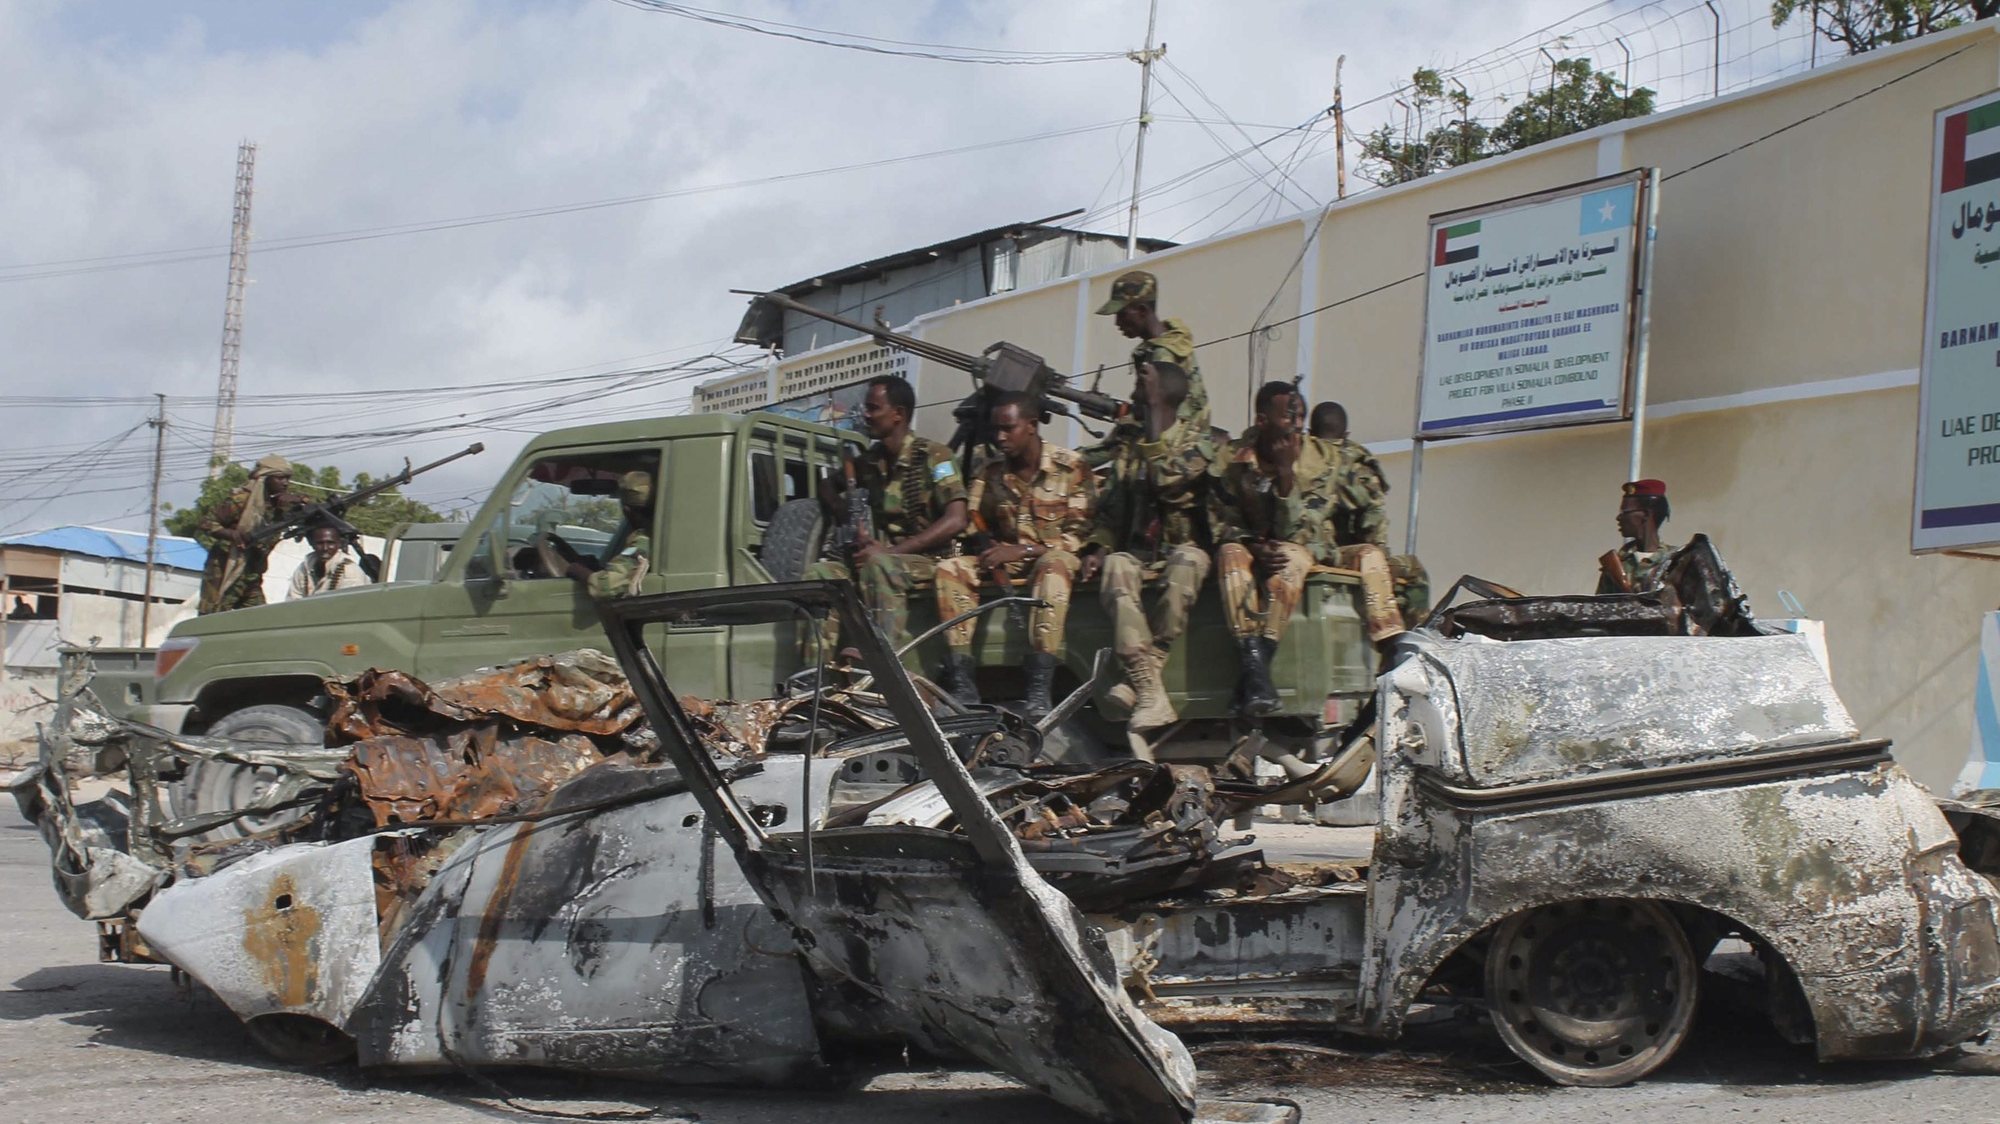 epa04306955 Somali troops sit in the back of a pickup truck in front of a wreckage of a car that exploded at the gate of the presidential palace in Mogadishu, Somalia, 09 July 2014, where gunmen from the militant group al-Shabab attacked the night before. Militants stormed into the compound detonating a car bomb and firing shots on late 08 July, in an attempt to take control of the buildings inside. President Hassan Sheikh Mohamud was not inside the palace at the time of attack. Somali security officers and African Union troops thwarted attacks after exchanging gunfire. Three attackers were killed and one was captured, said the presidential office in a statement.  EPA/SAID YUSUF WARSAME